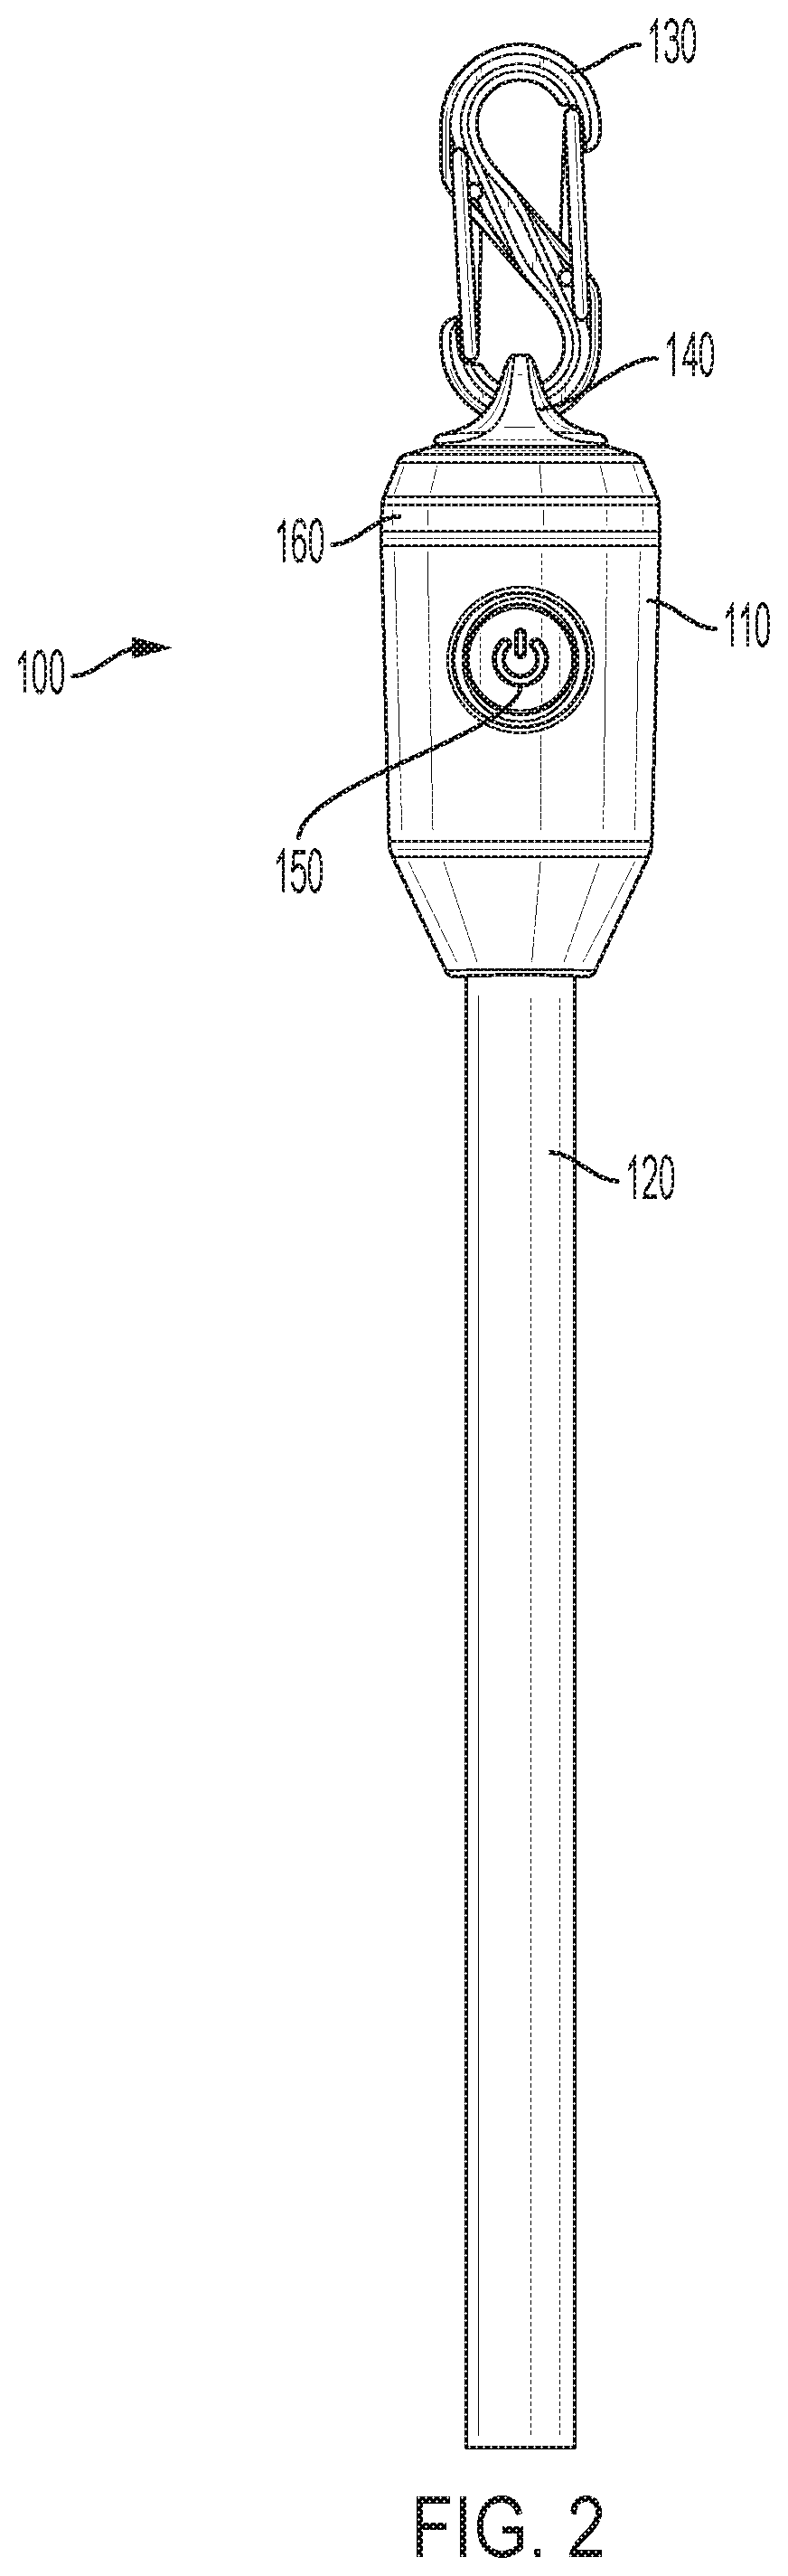 Systems and methods for an efficient, rechargeable glowstick